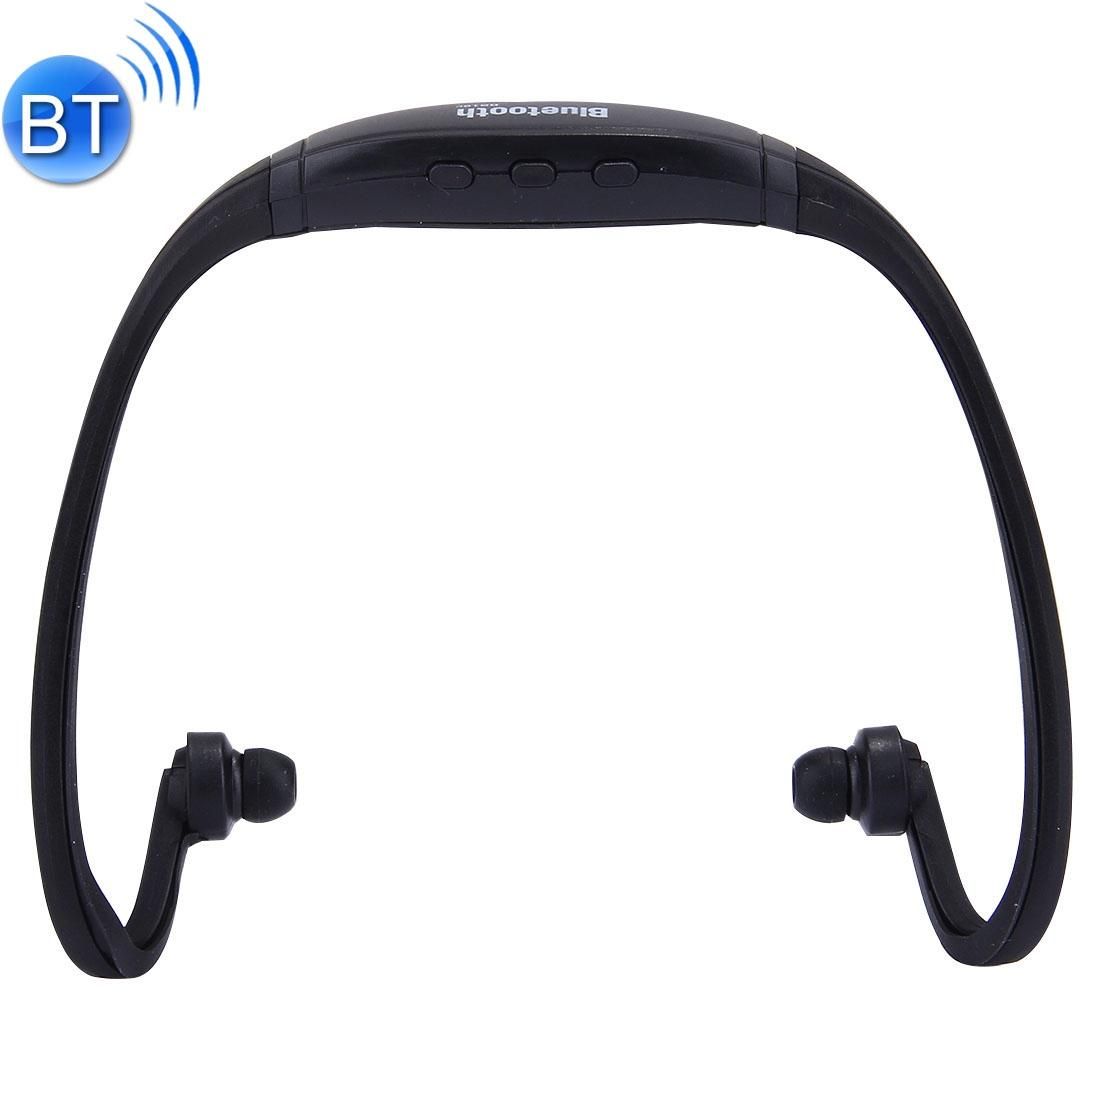 Snel Pompeii afwijzing Buy Cheap Earphone Accessories In Bulk From China Dropshipping Suppliers,  BS19C Life Waterproof Stereo Wireless Sports Bluetooth In Ear Headphone  Headset With Micro SD Card Slot & Hands Free, For Smart Phones